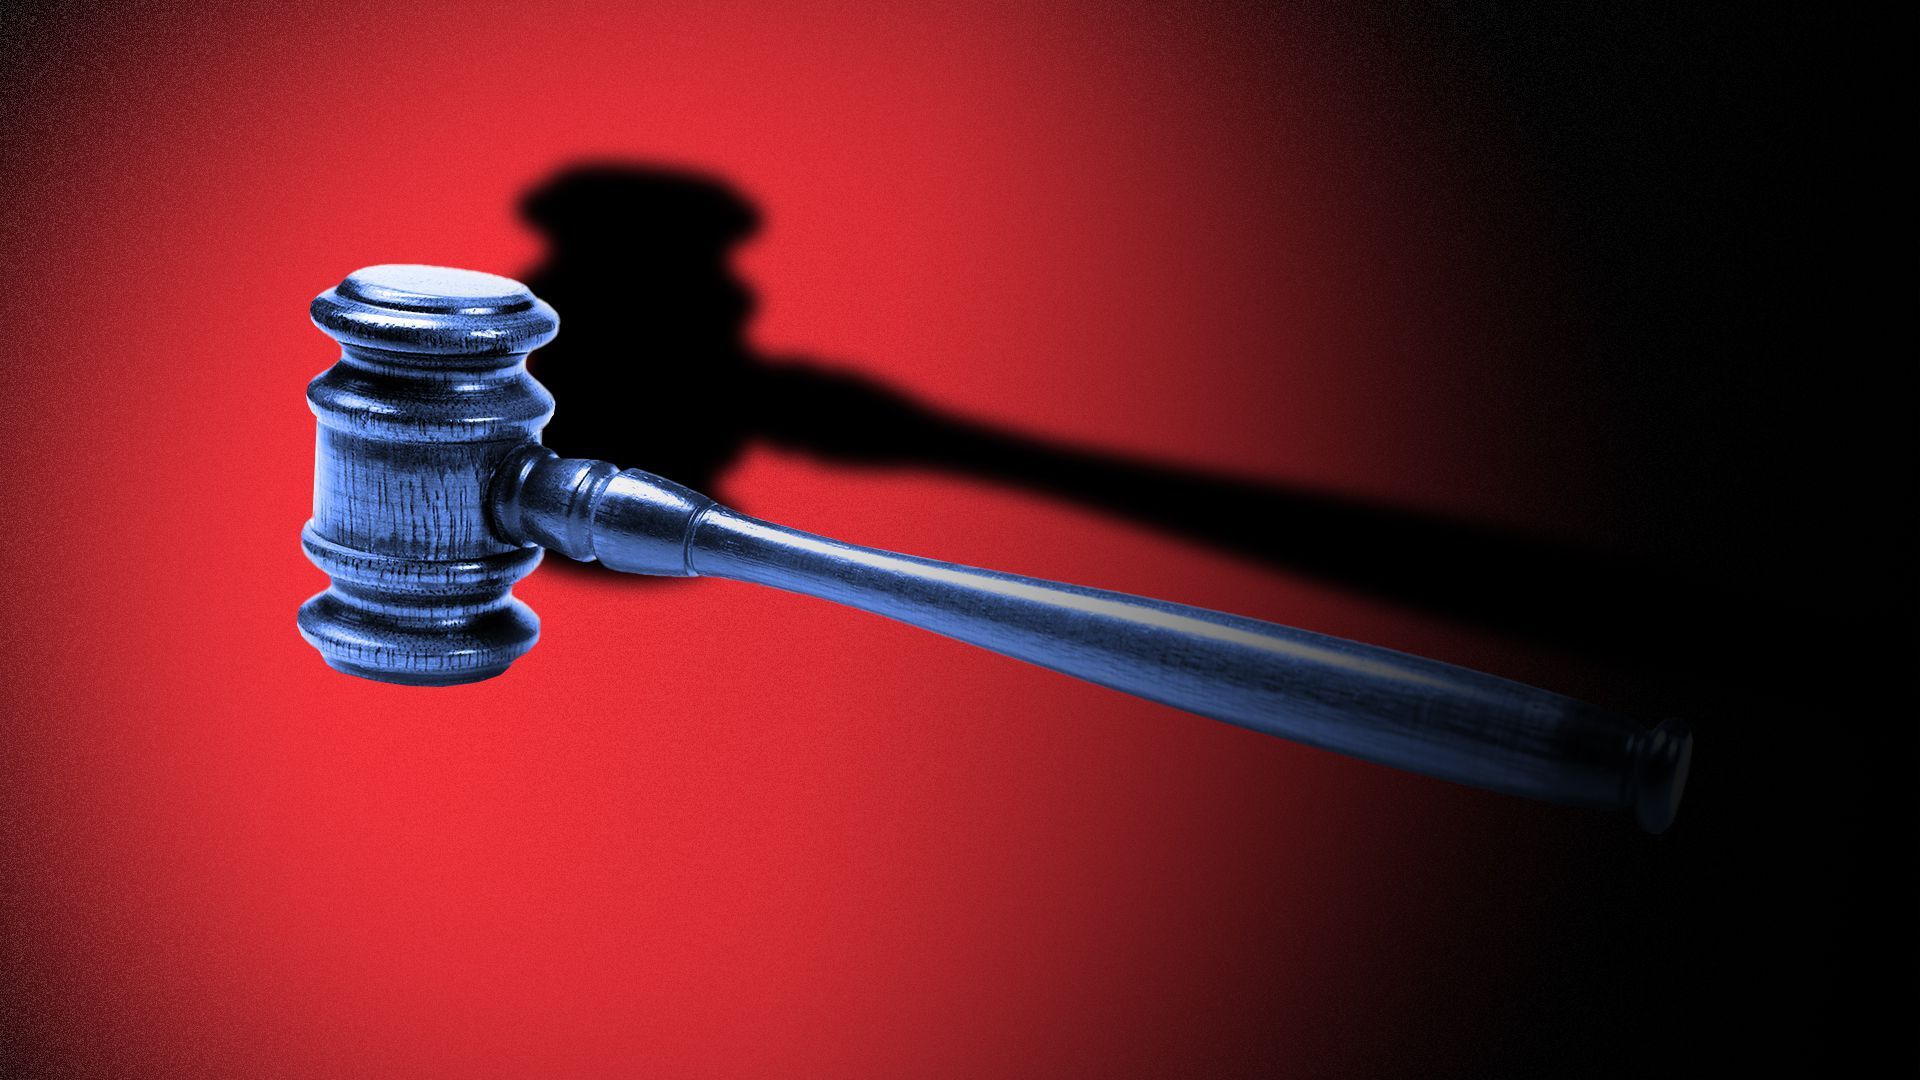 Gavel on red background